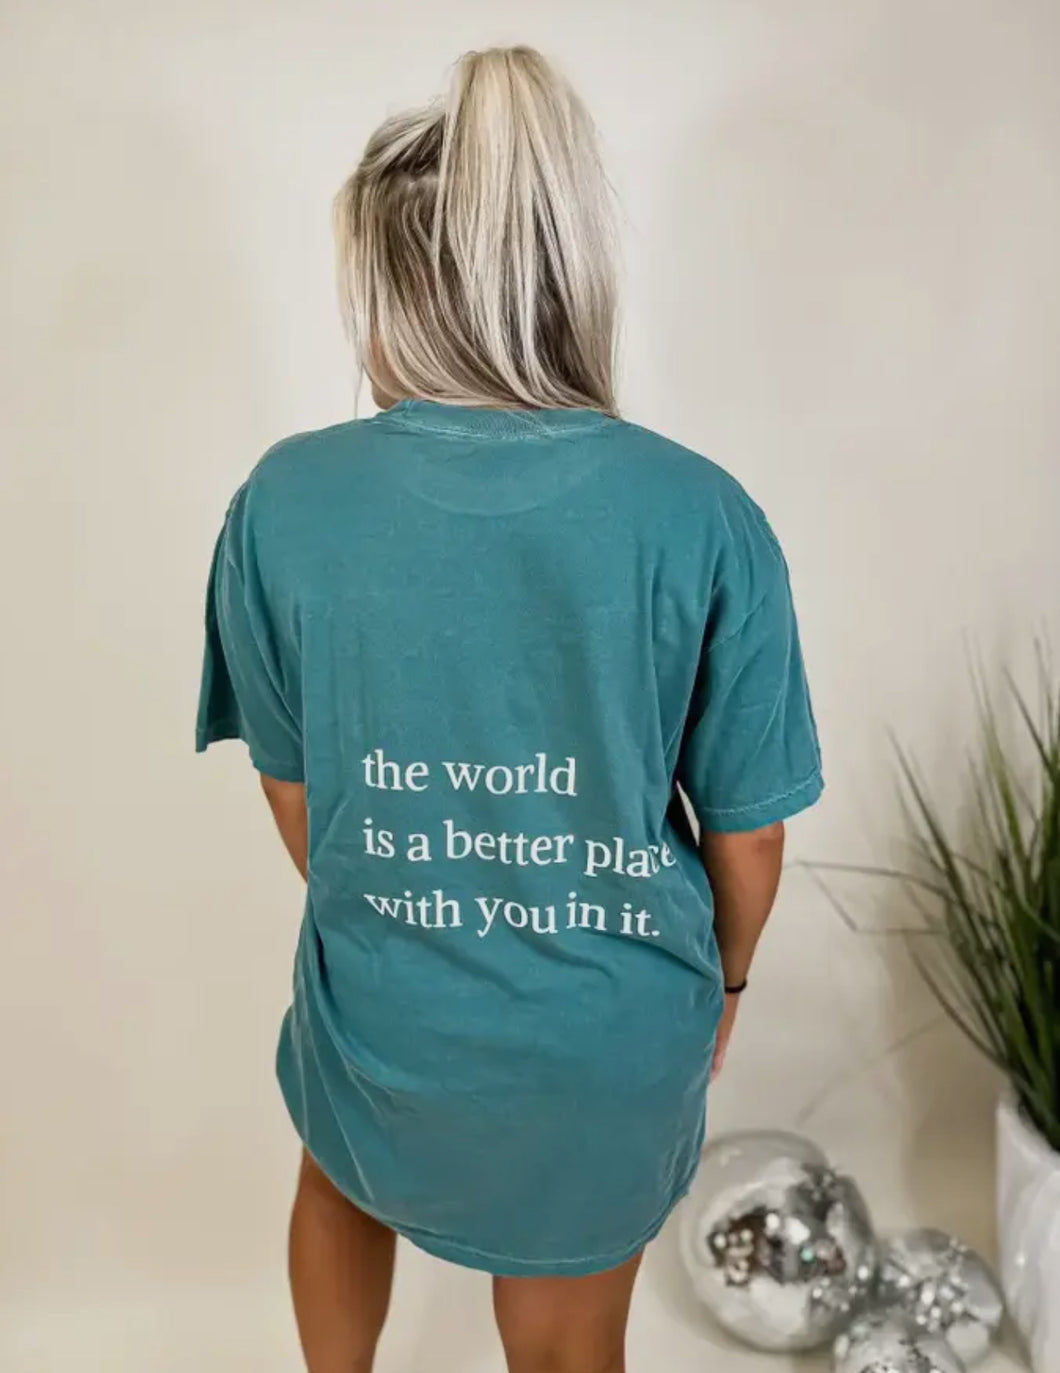 The world is a better place with you in it tee